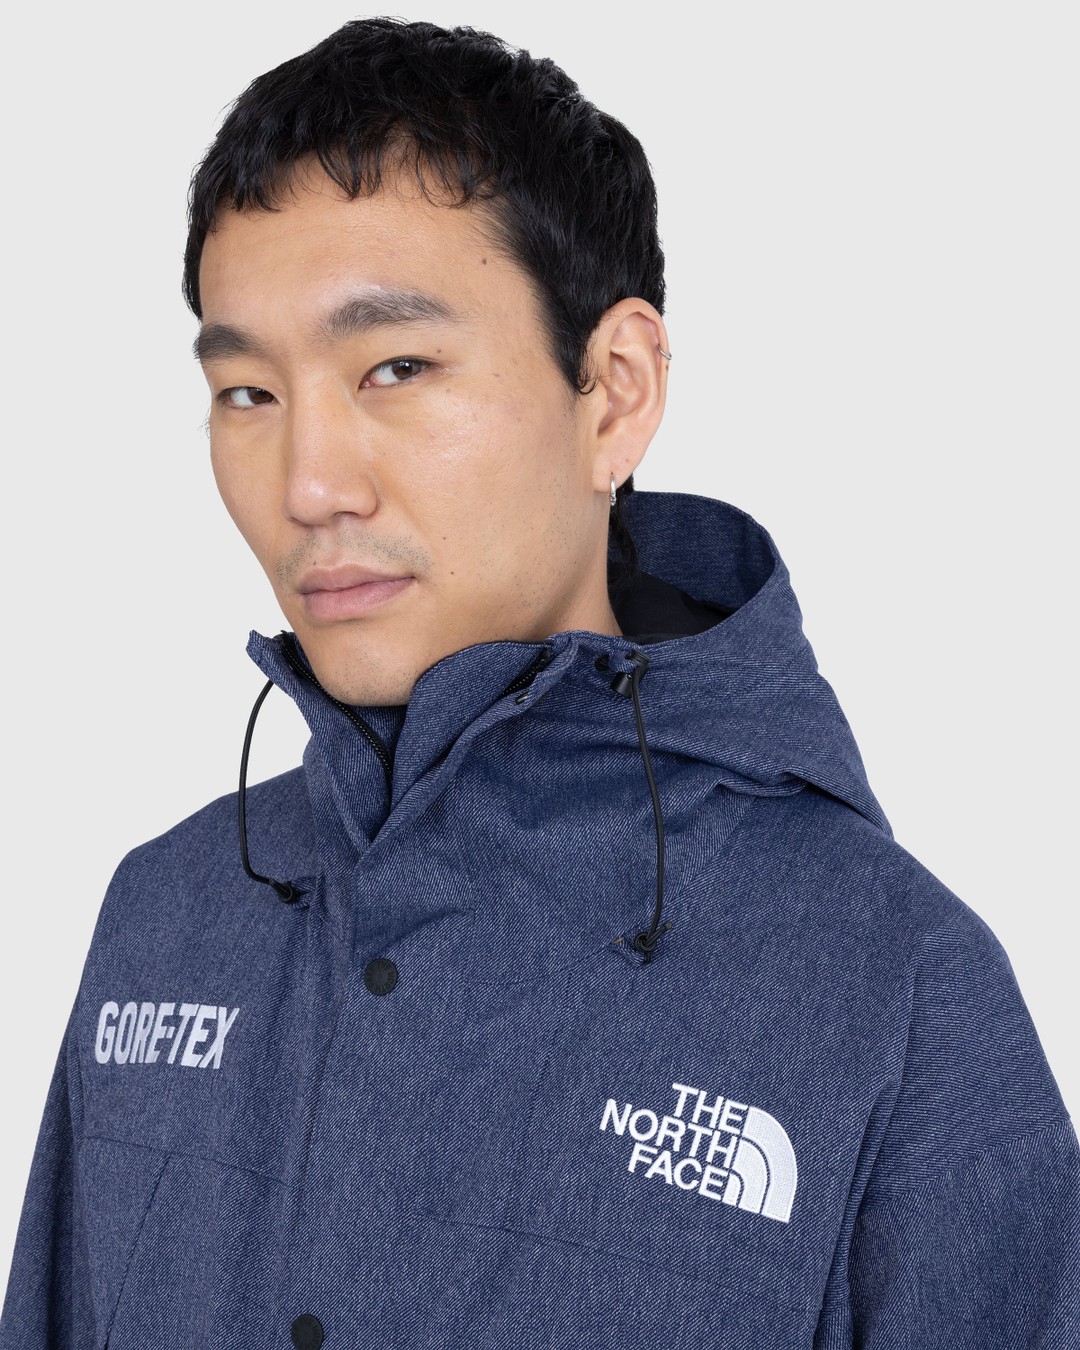 The North Face – GORE-TEX Mountain Jacket Denim Blue/TNF Black - Outerwear - Blue - Image 6